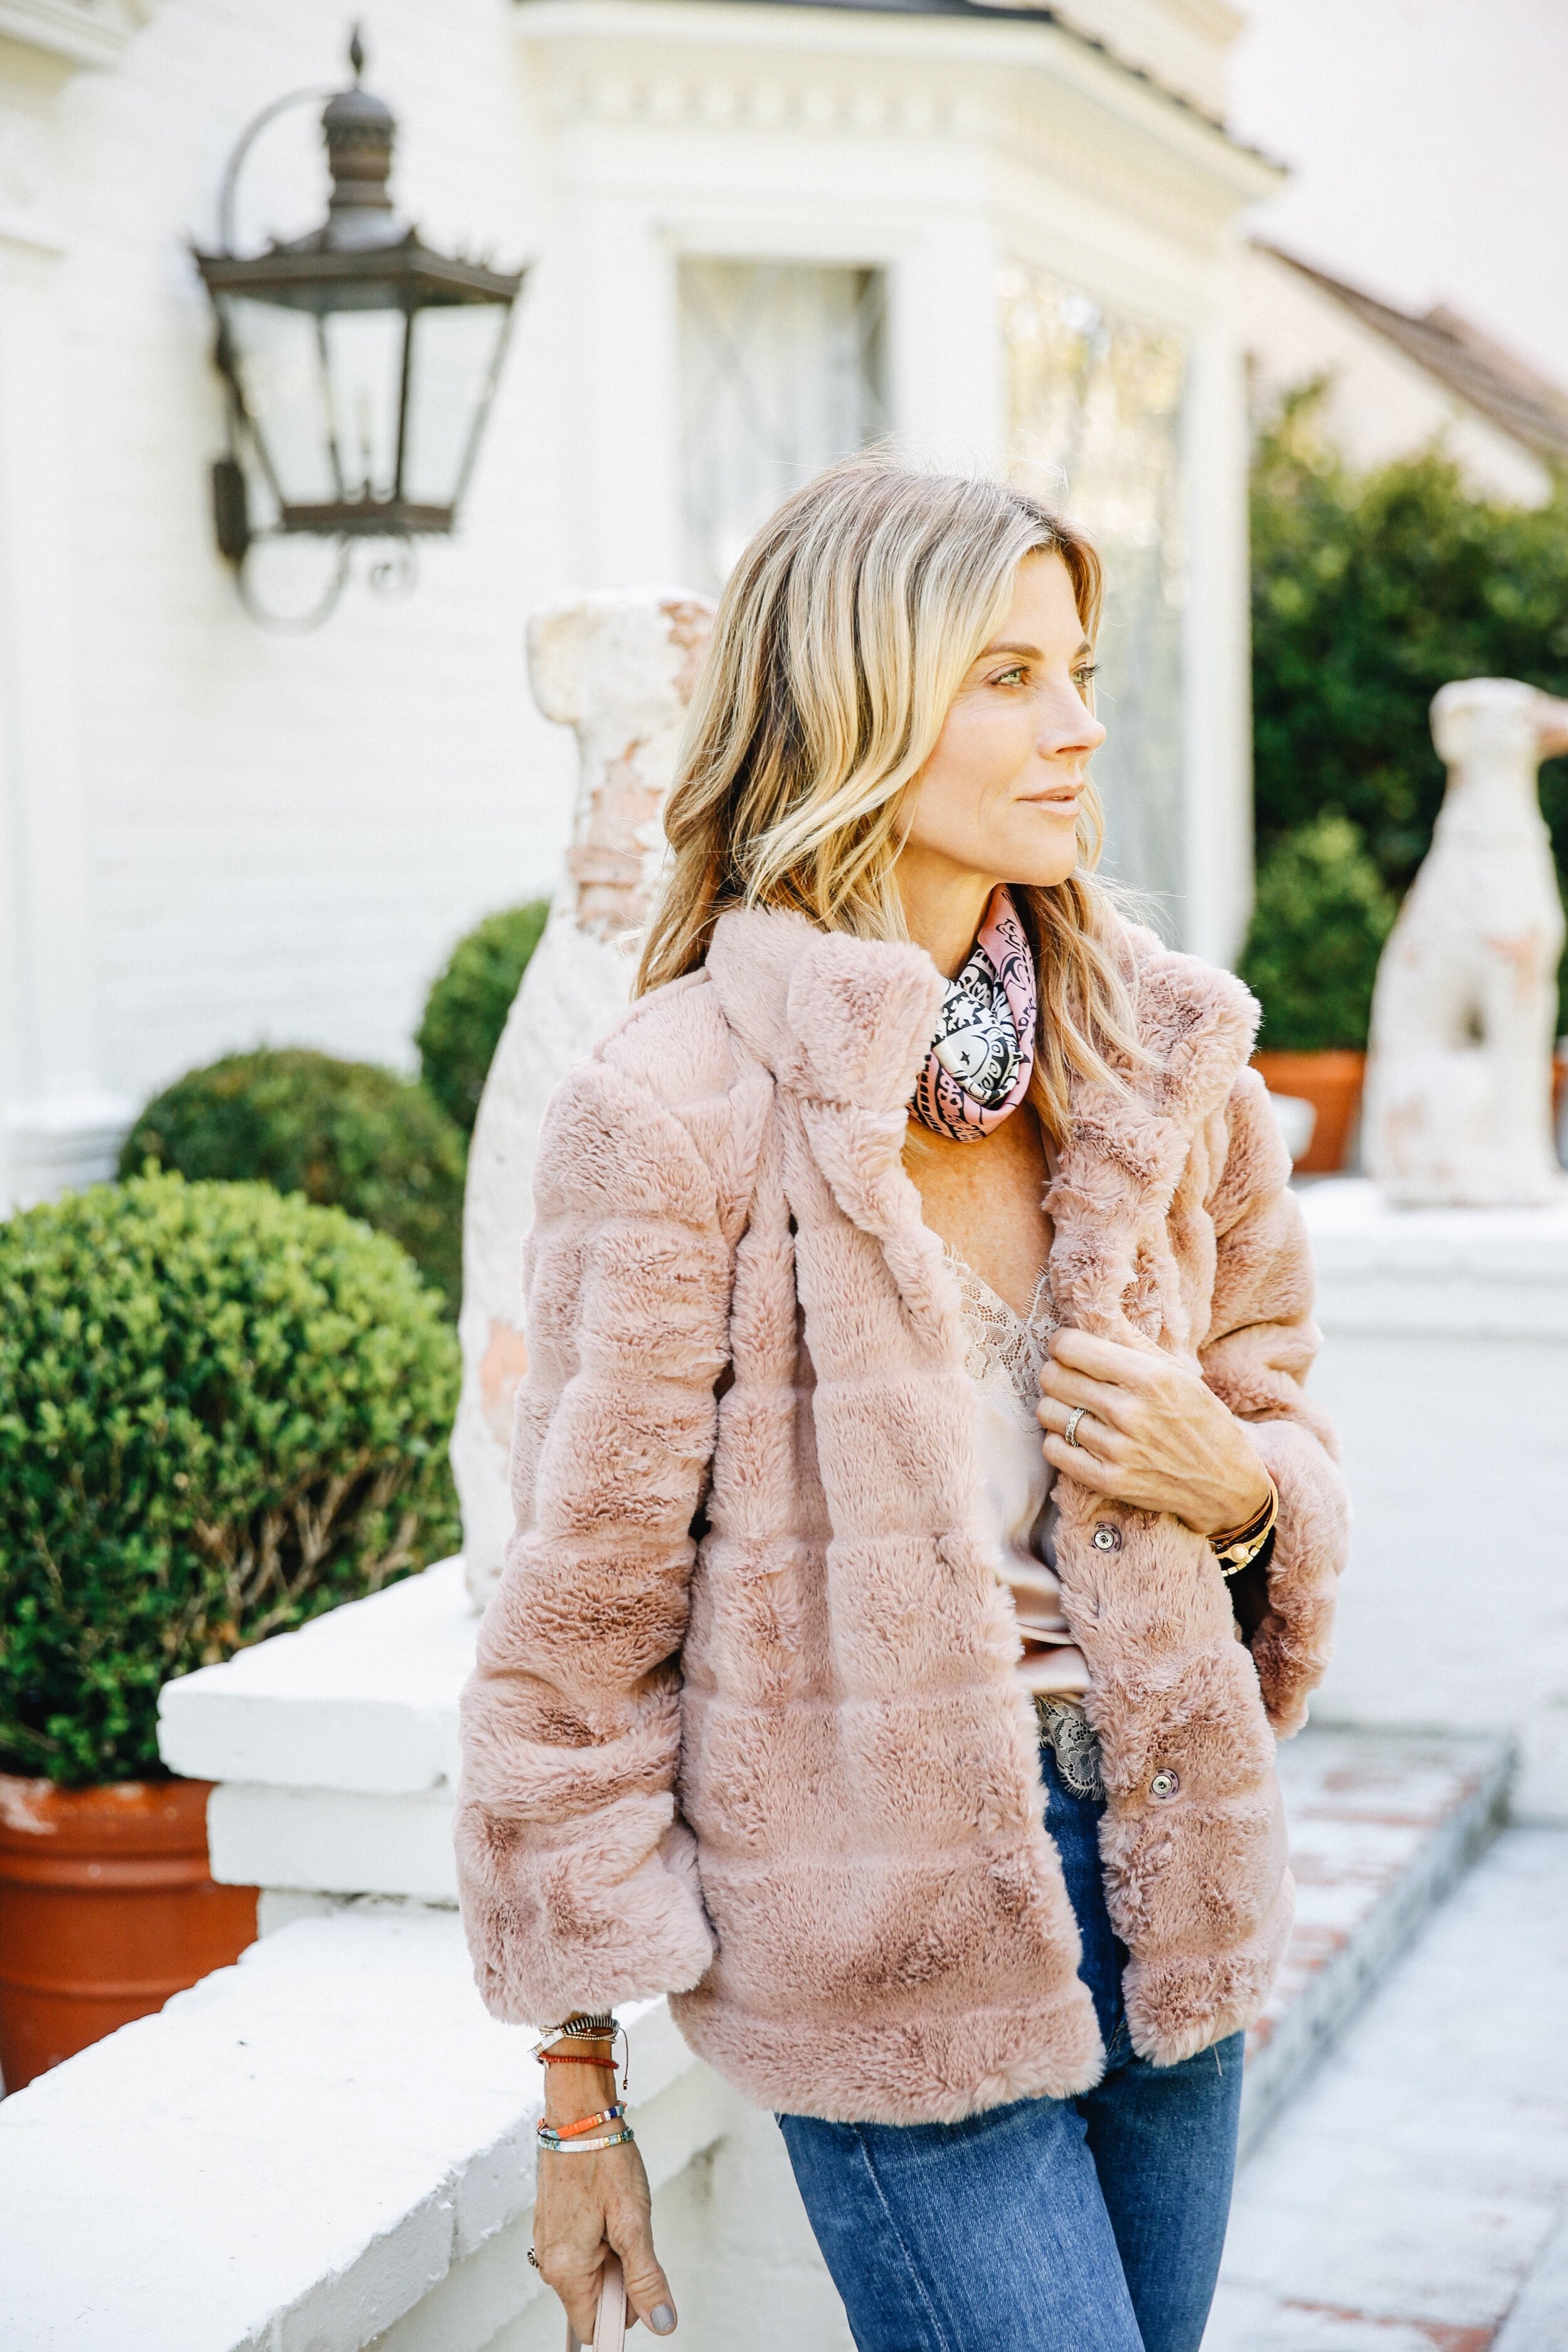 MEET MICHELLE - ROSÉ FAUX FUR JACKET FROM THE FGXGG COLLECTION — The  Grateful Gardenia